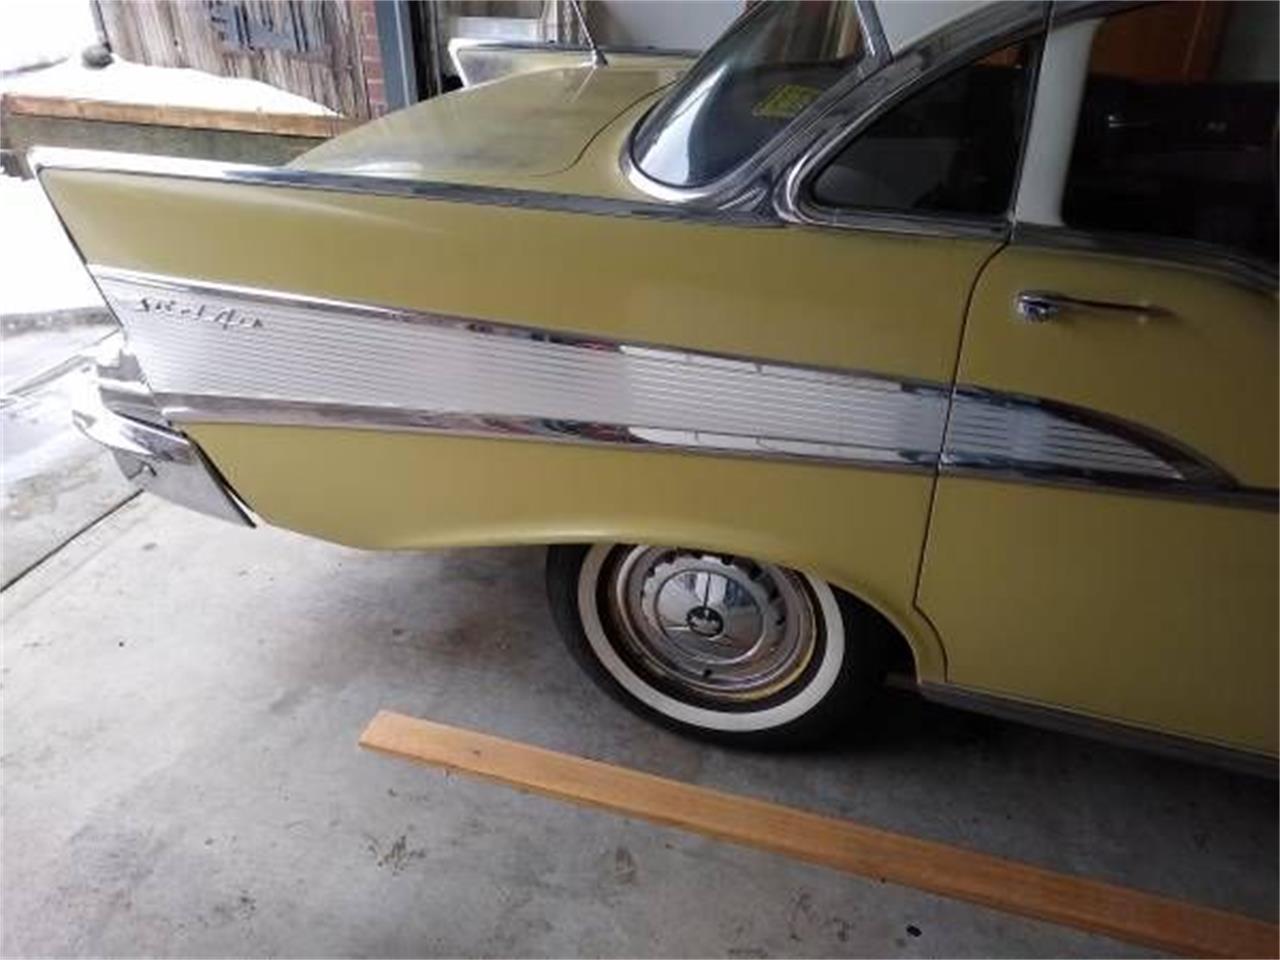 1957 Chevrolet Bel Air for sale in Cadillac, MI – photo 2